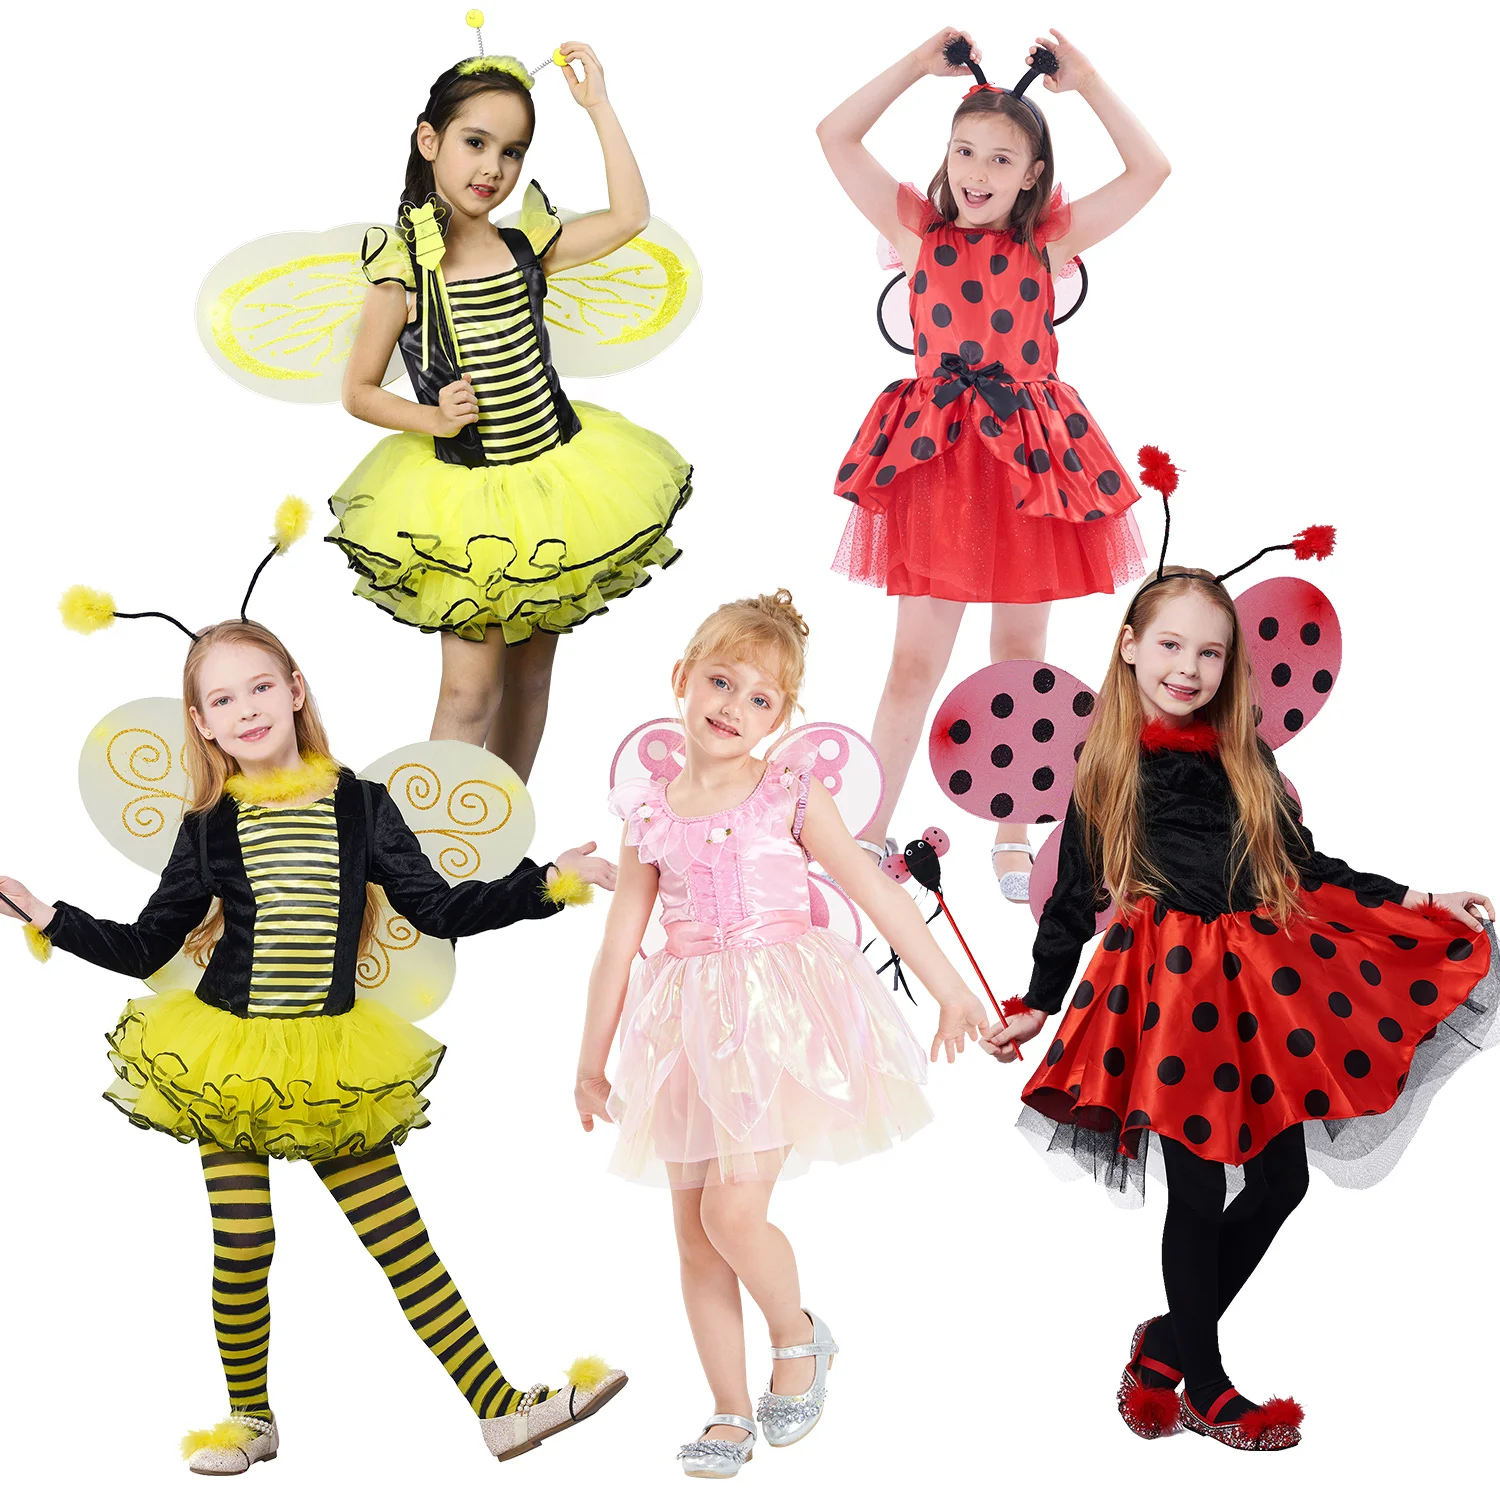 

TV & Movie Costumes Girls Dress Kids Ladybug Bumble Bee Fancy Dress Up Outfit Carnival Halloween Party